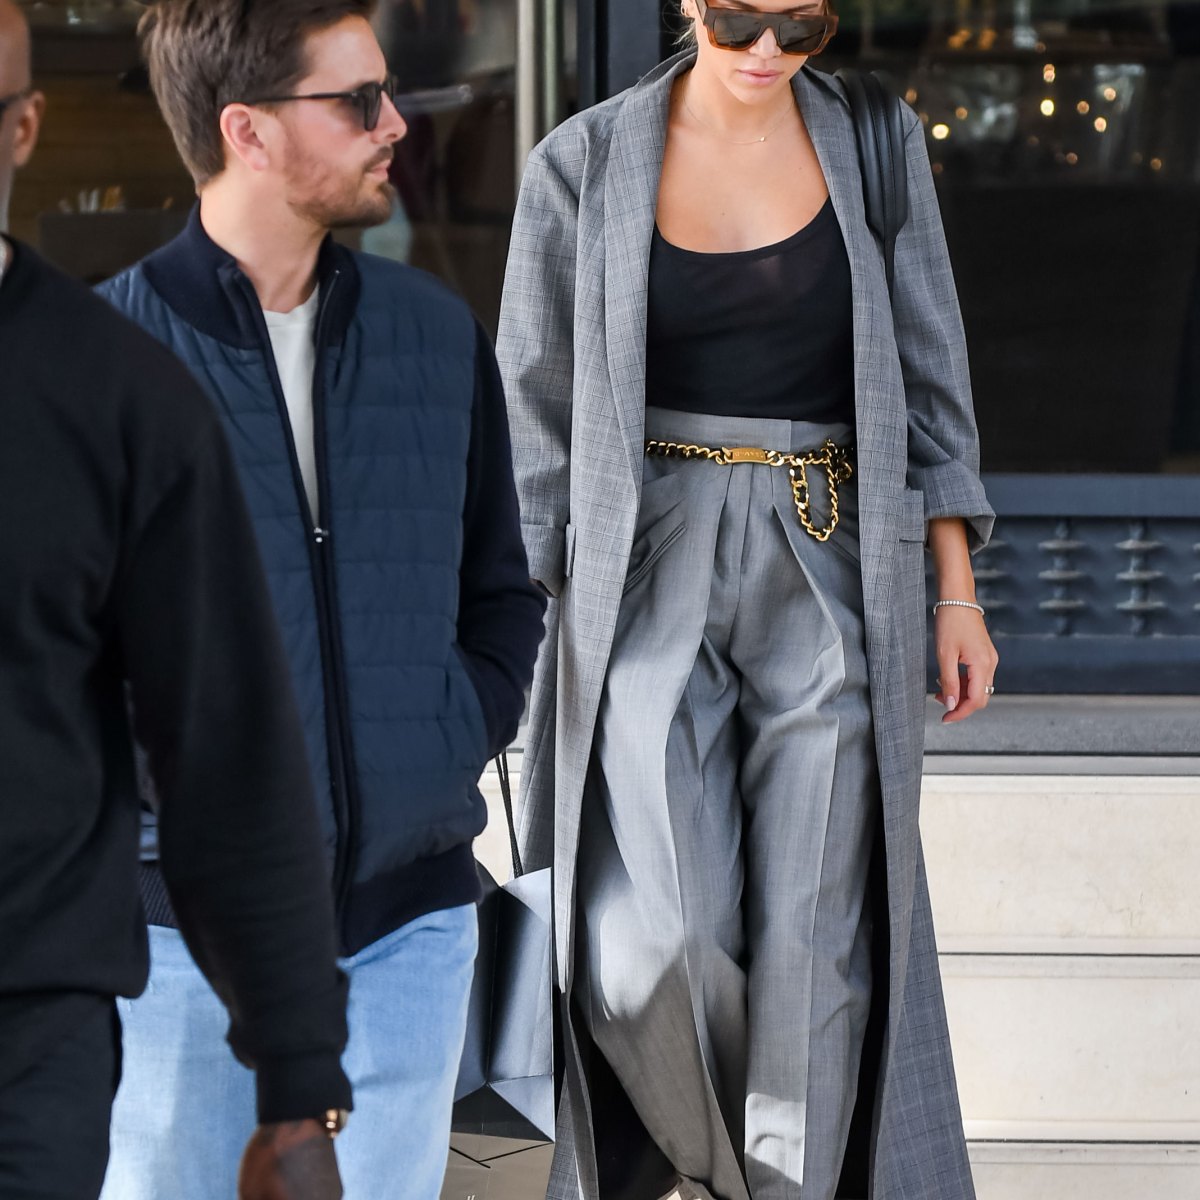 Sofia Richie looks stylish in a Fendi turtleneck and jeans while she and Scott  Disick shop at Prada